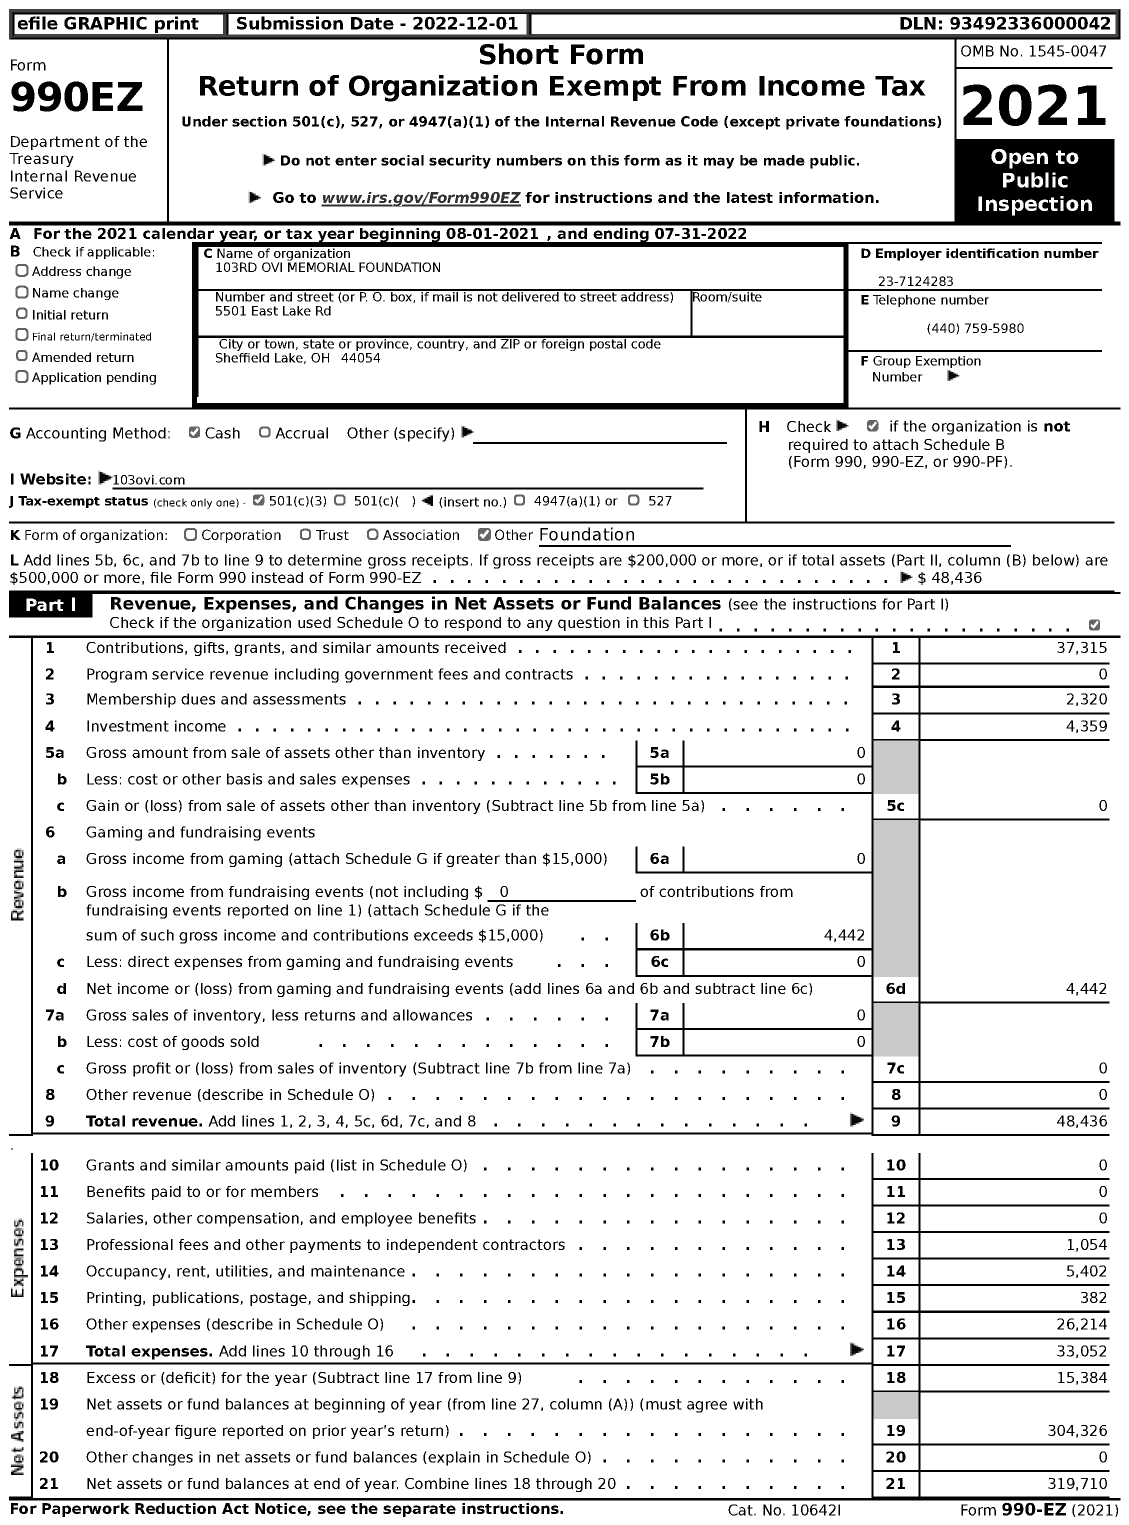 Image of first page of 2021 Form 990EZ for 103rd Ovi Memorial Foundation